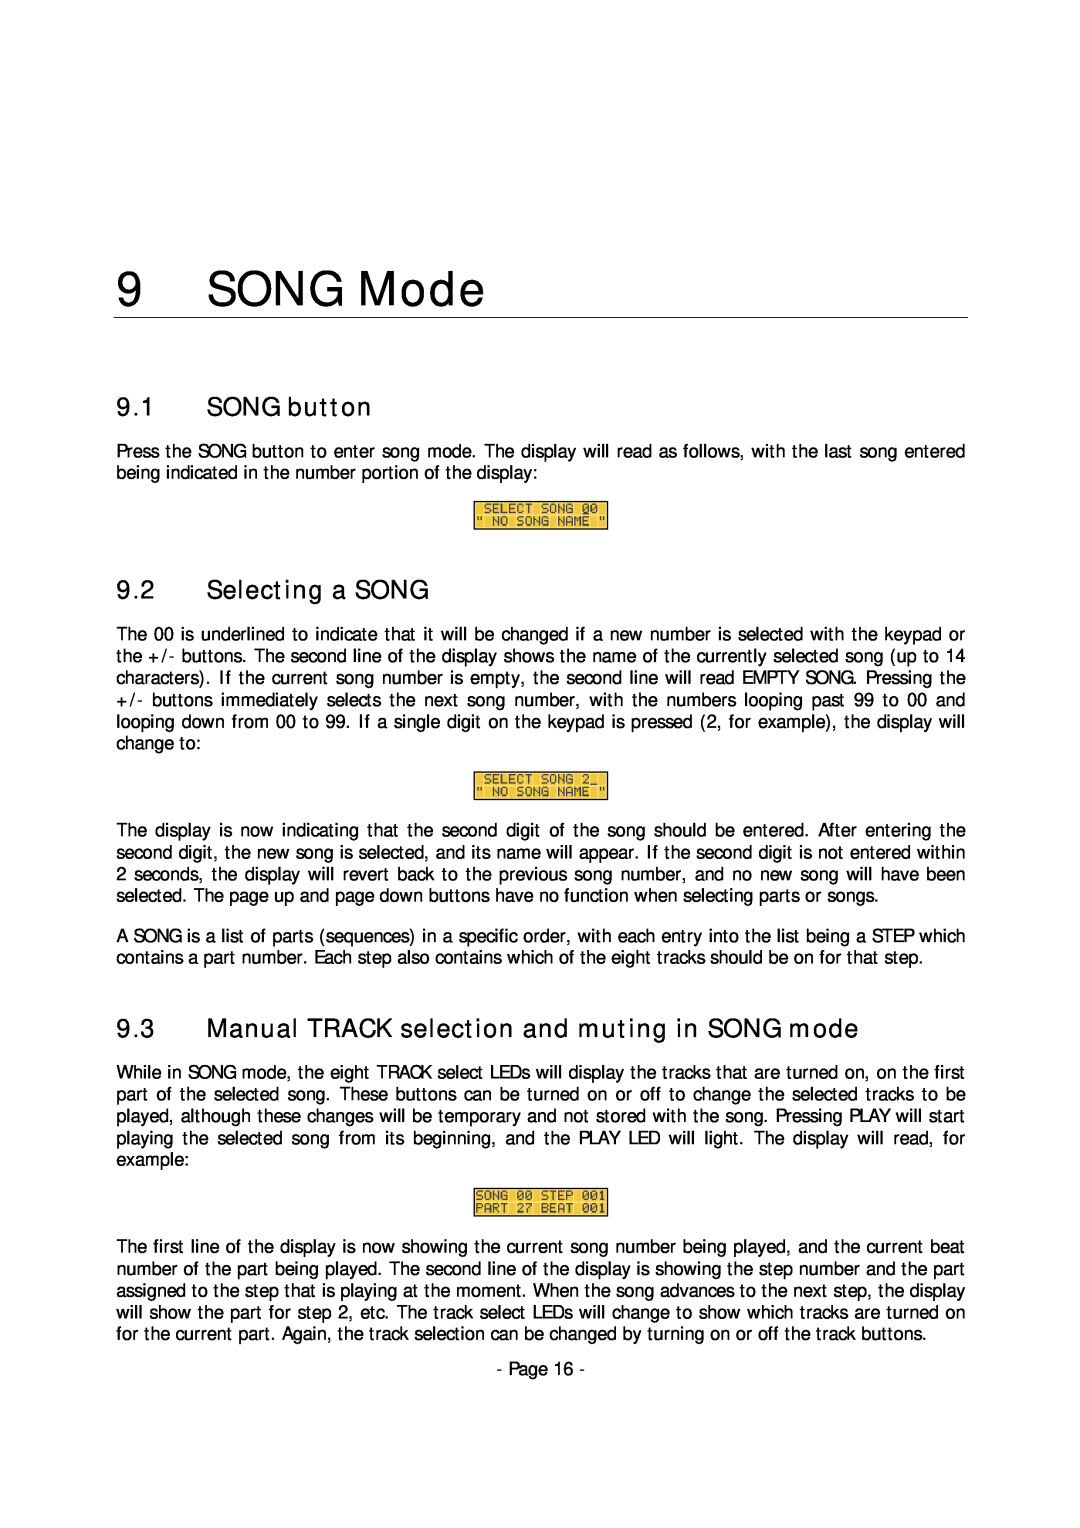 Alesis MMT-8 manual SONG Mode, 9.1SONG button, 9.2Selecting a SONG, 9.3Manual TRACK selection and muting in SONG mode 